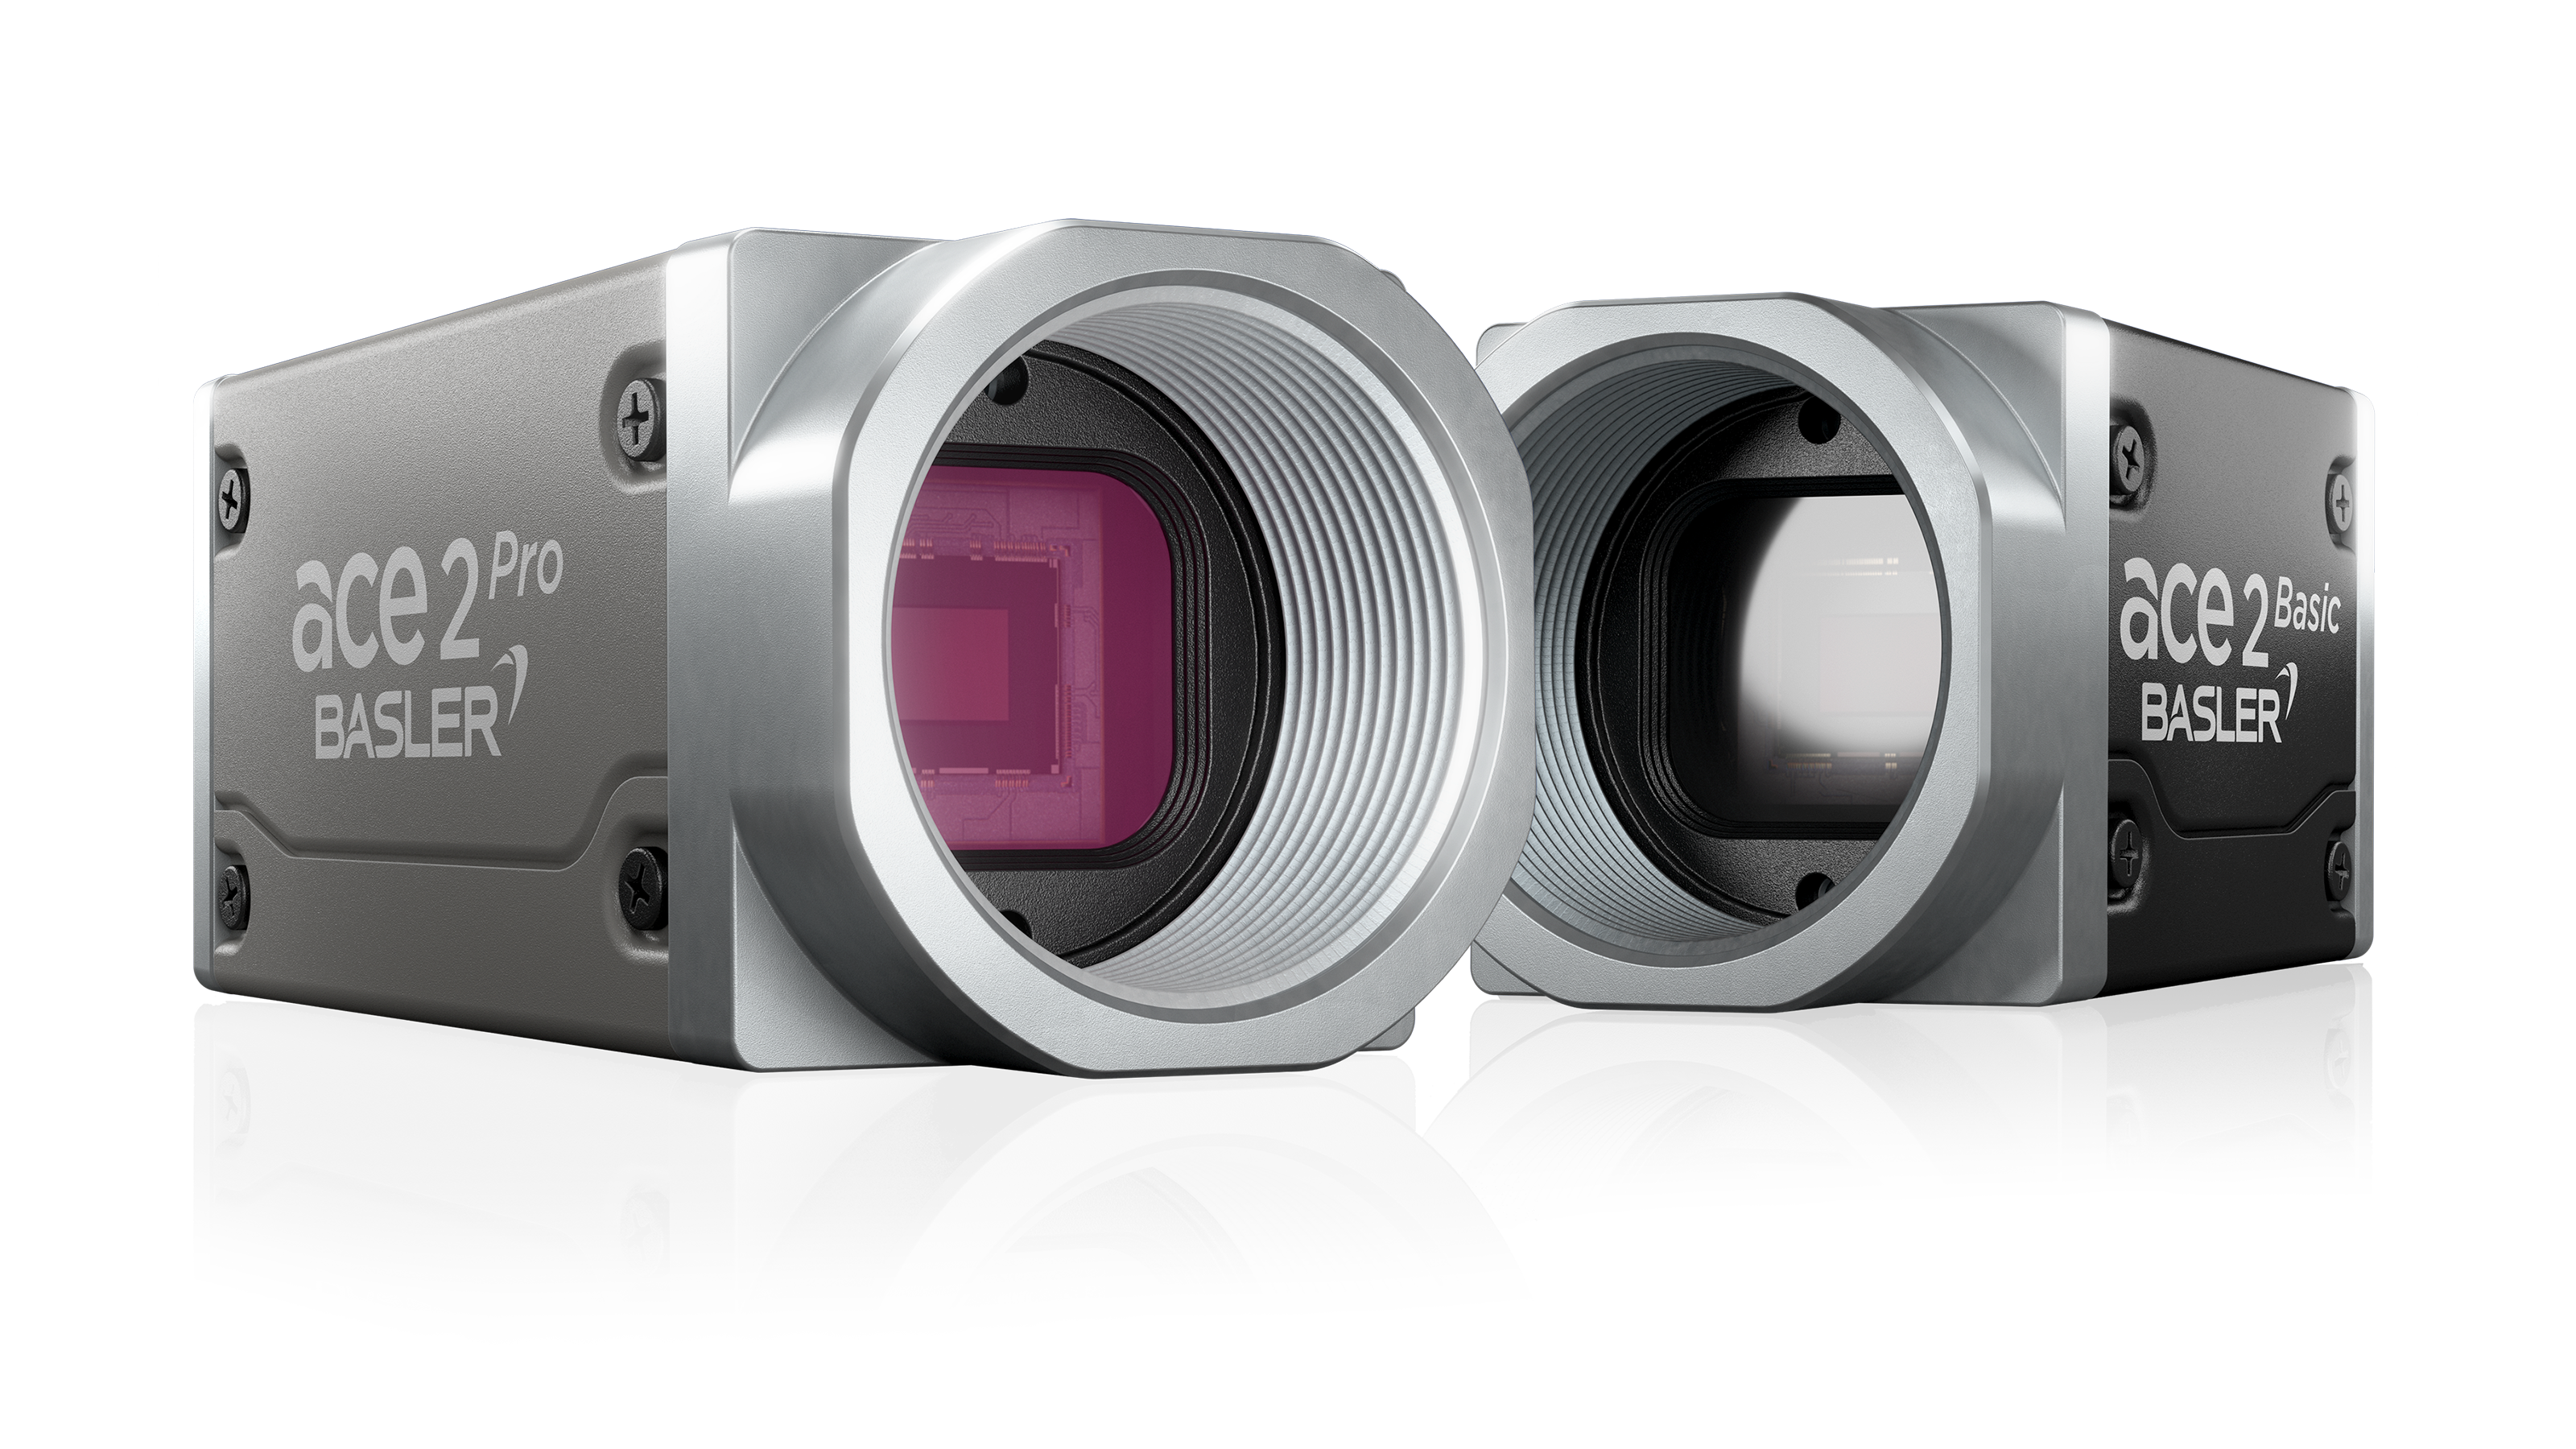 Discover Machine Vision Cameras from Basler